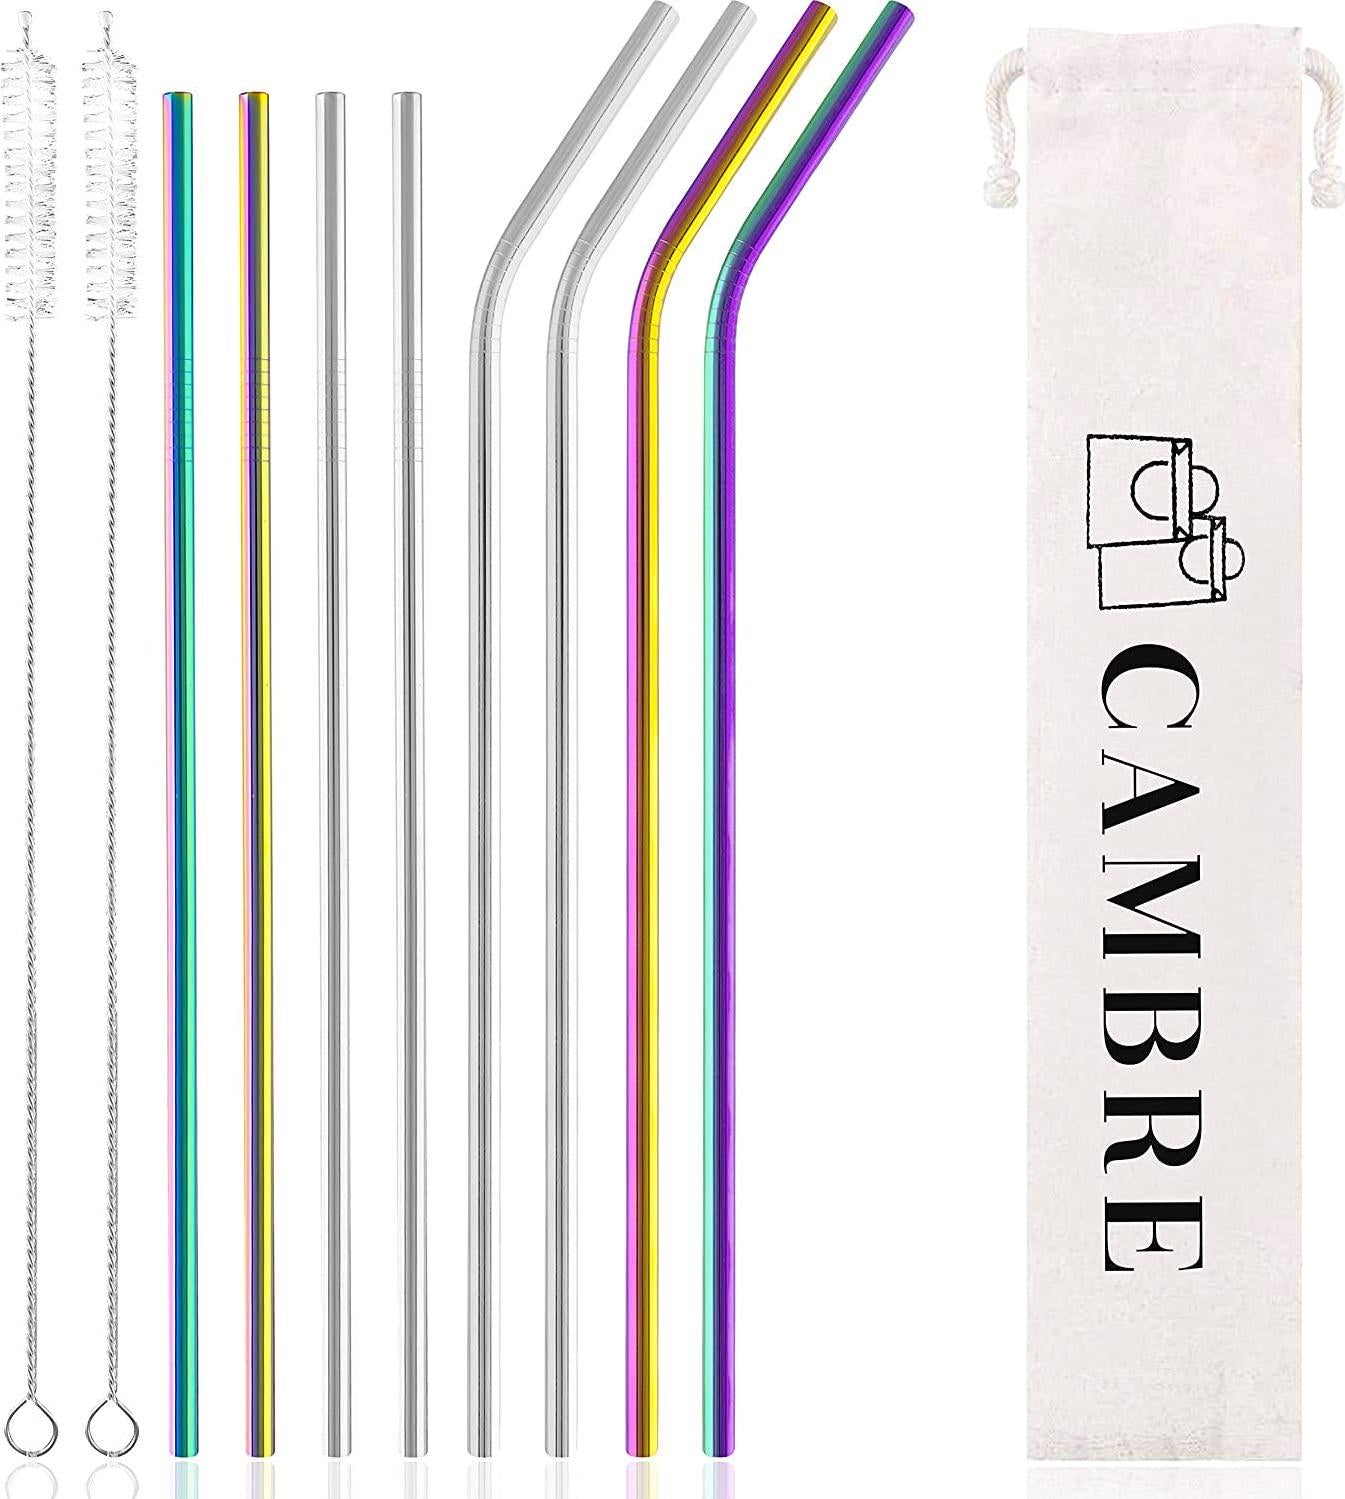 Cambre, Metal Straw, Stainless Steel Straws for Drinking, Recyclable Glass Straws, Pack of 8 (4 Straight and 4 Bent) with Cleaning Brushes, Portable Pouch Bag